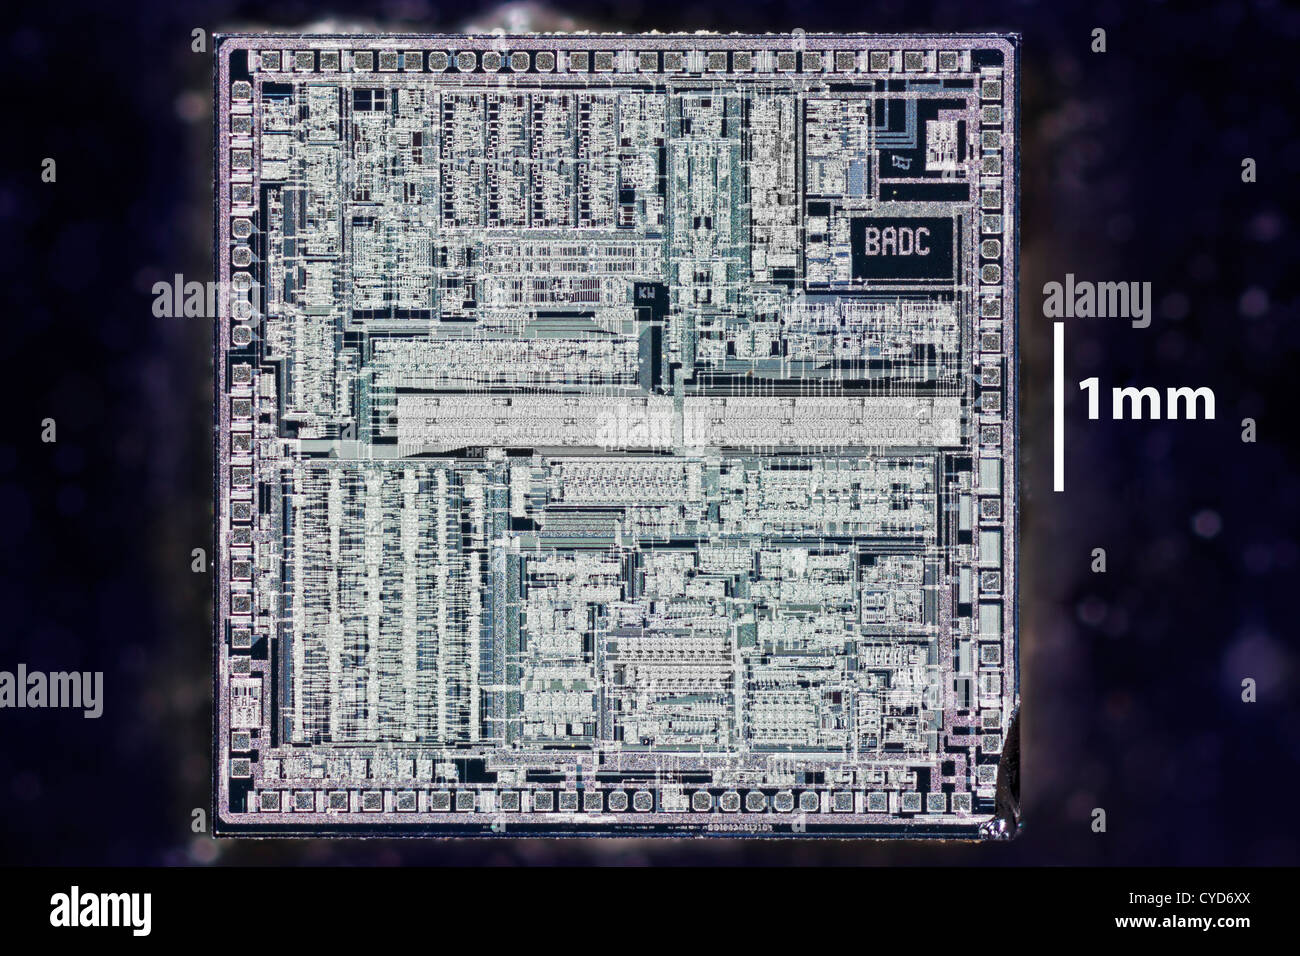 Silicon chip, integrated circuit, from a hard disk drive VLSI DIE around 1995 vintage Stock Photo